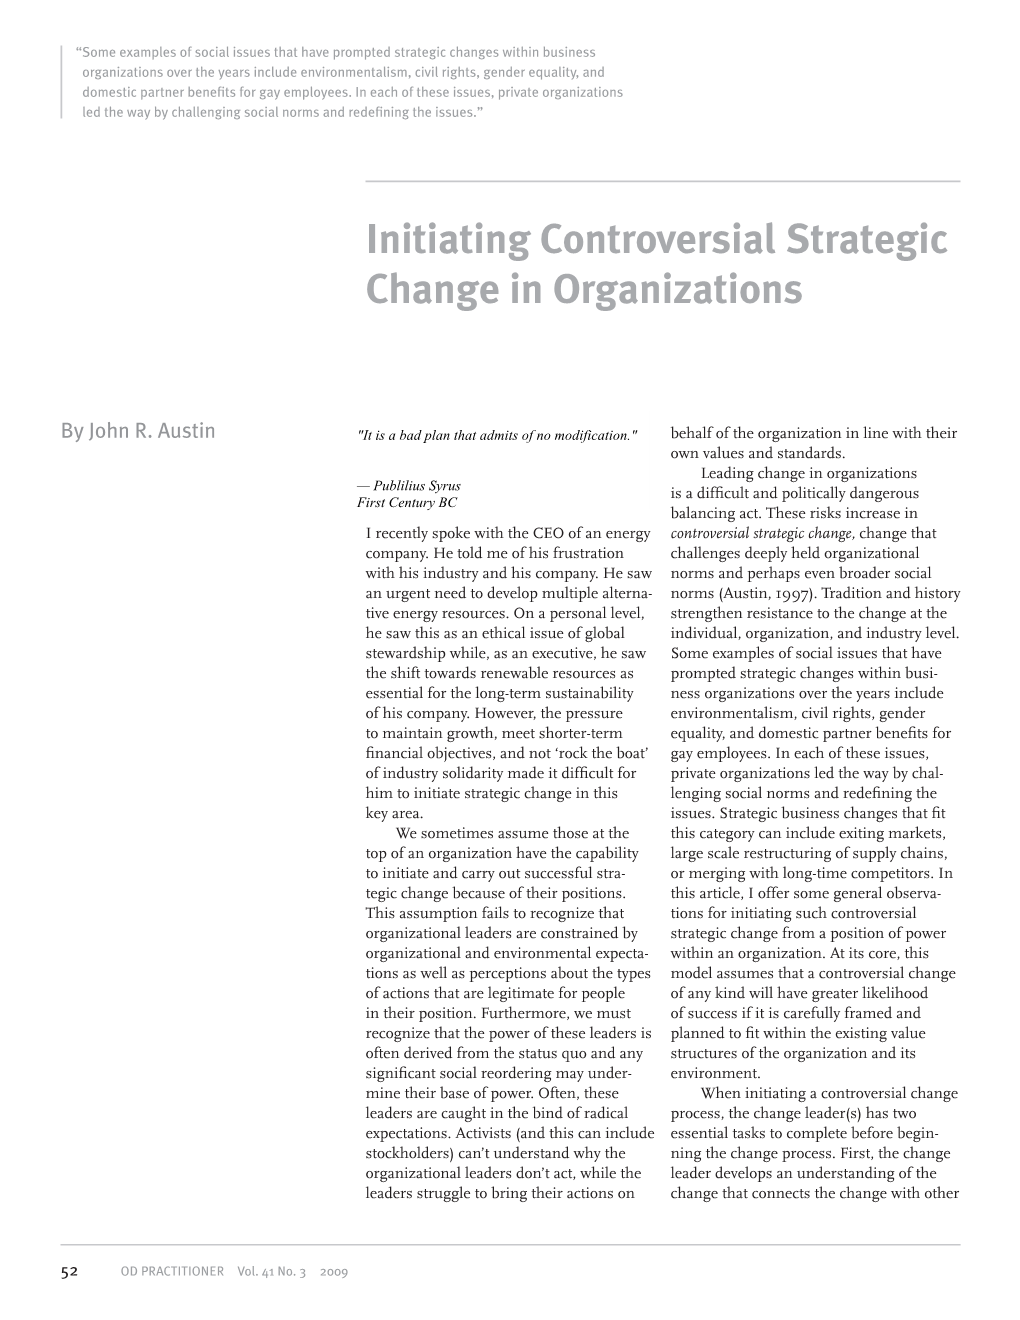 Initiating Controversial Strategic Change in Organizations